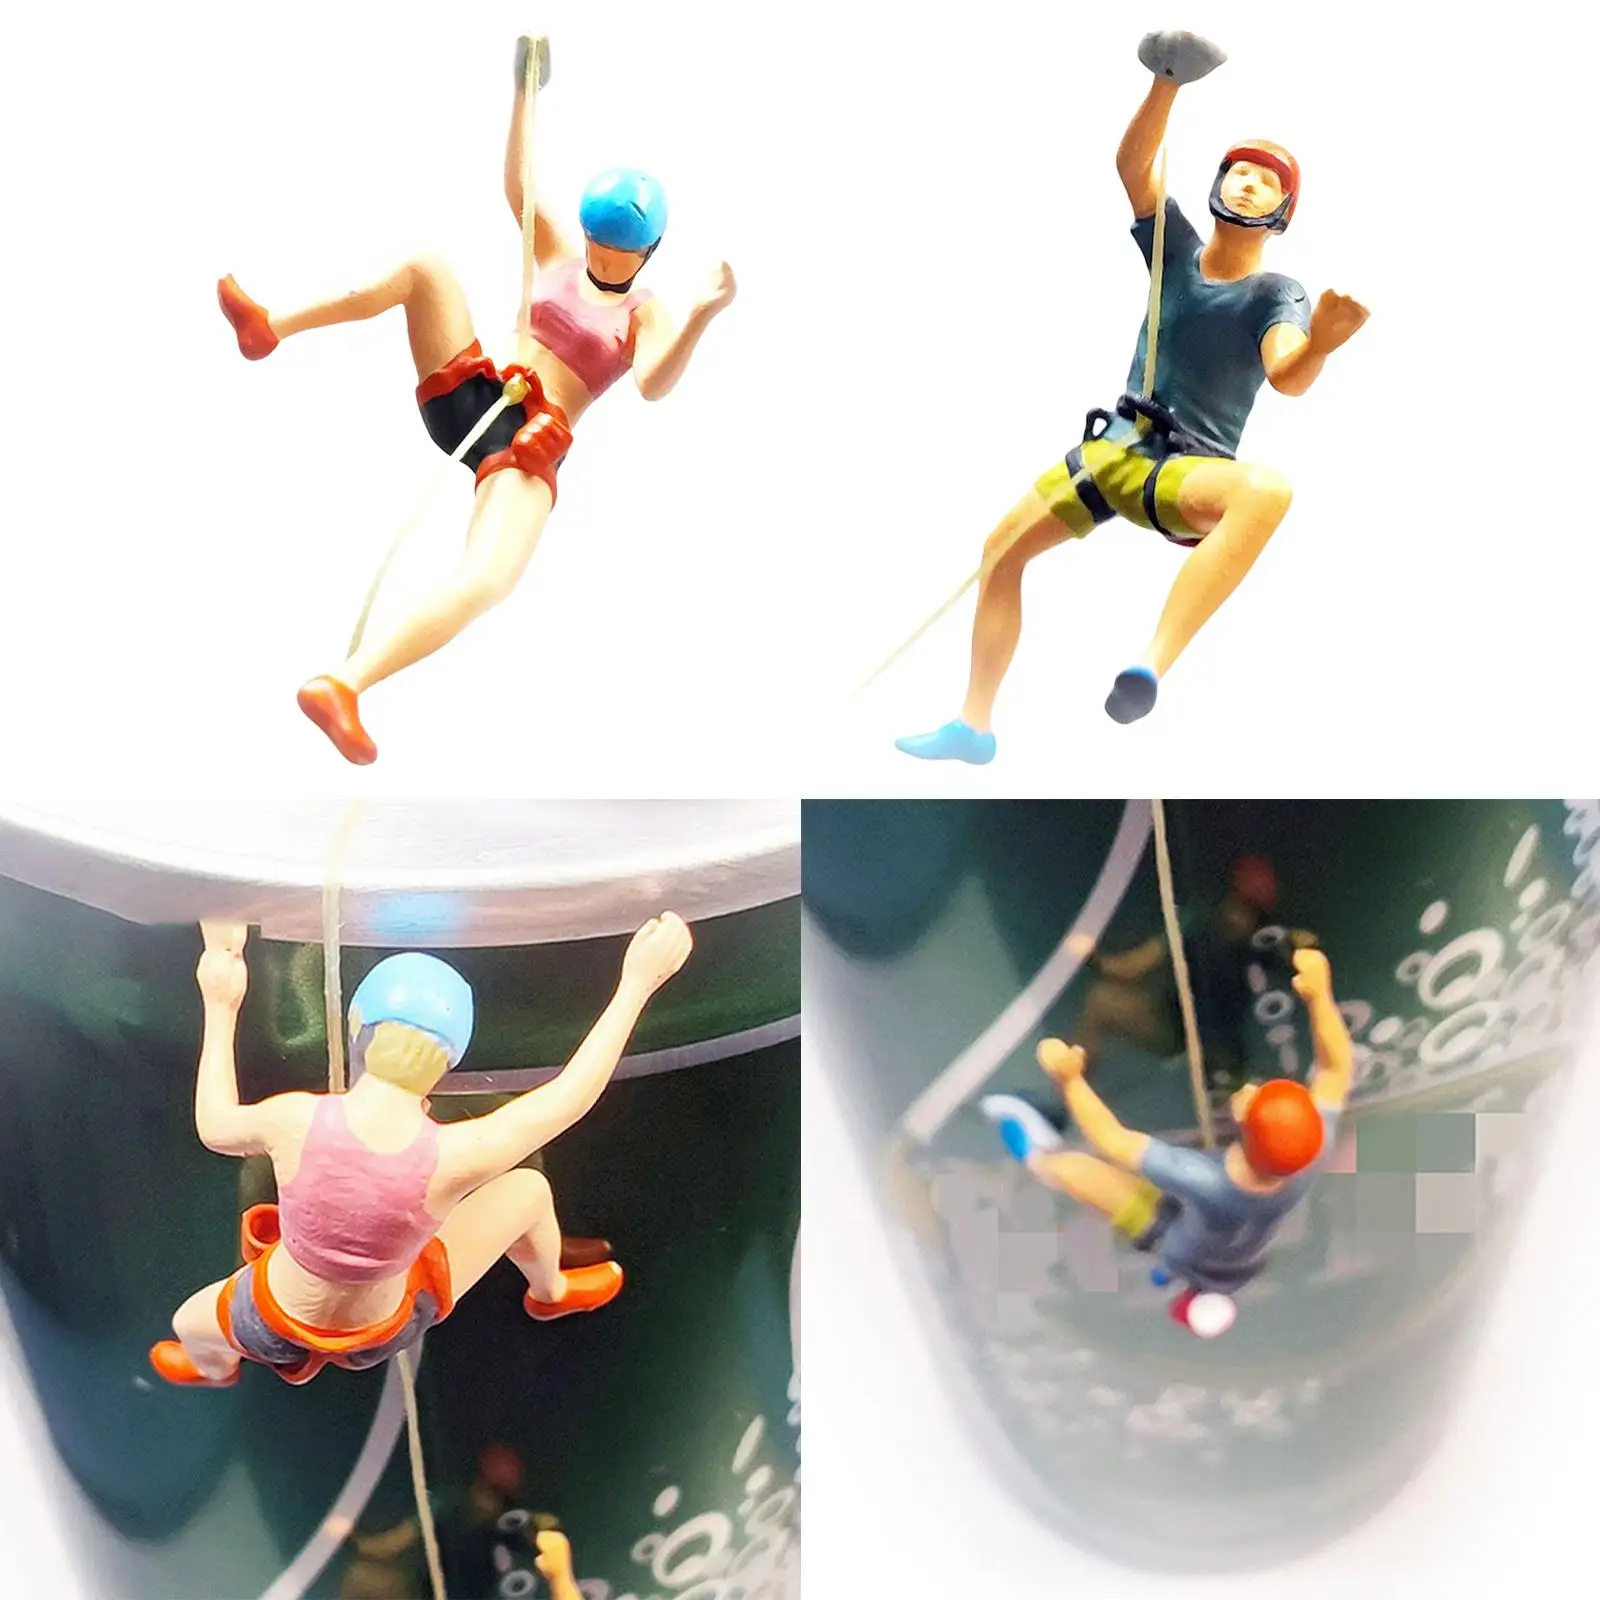 Climbing People Figurines Mounting Tiny People Toys for Dollhouse Diorama